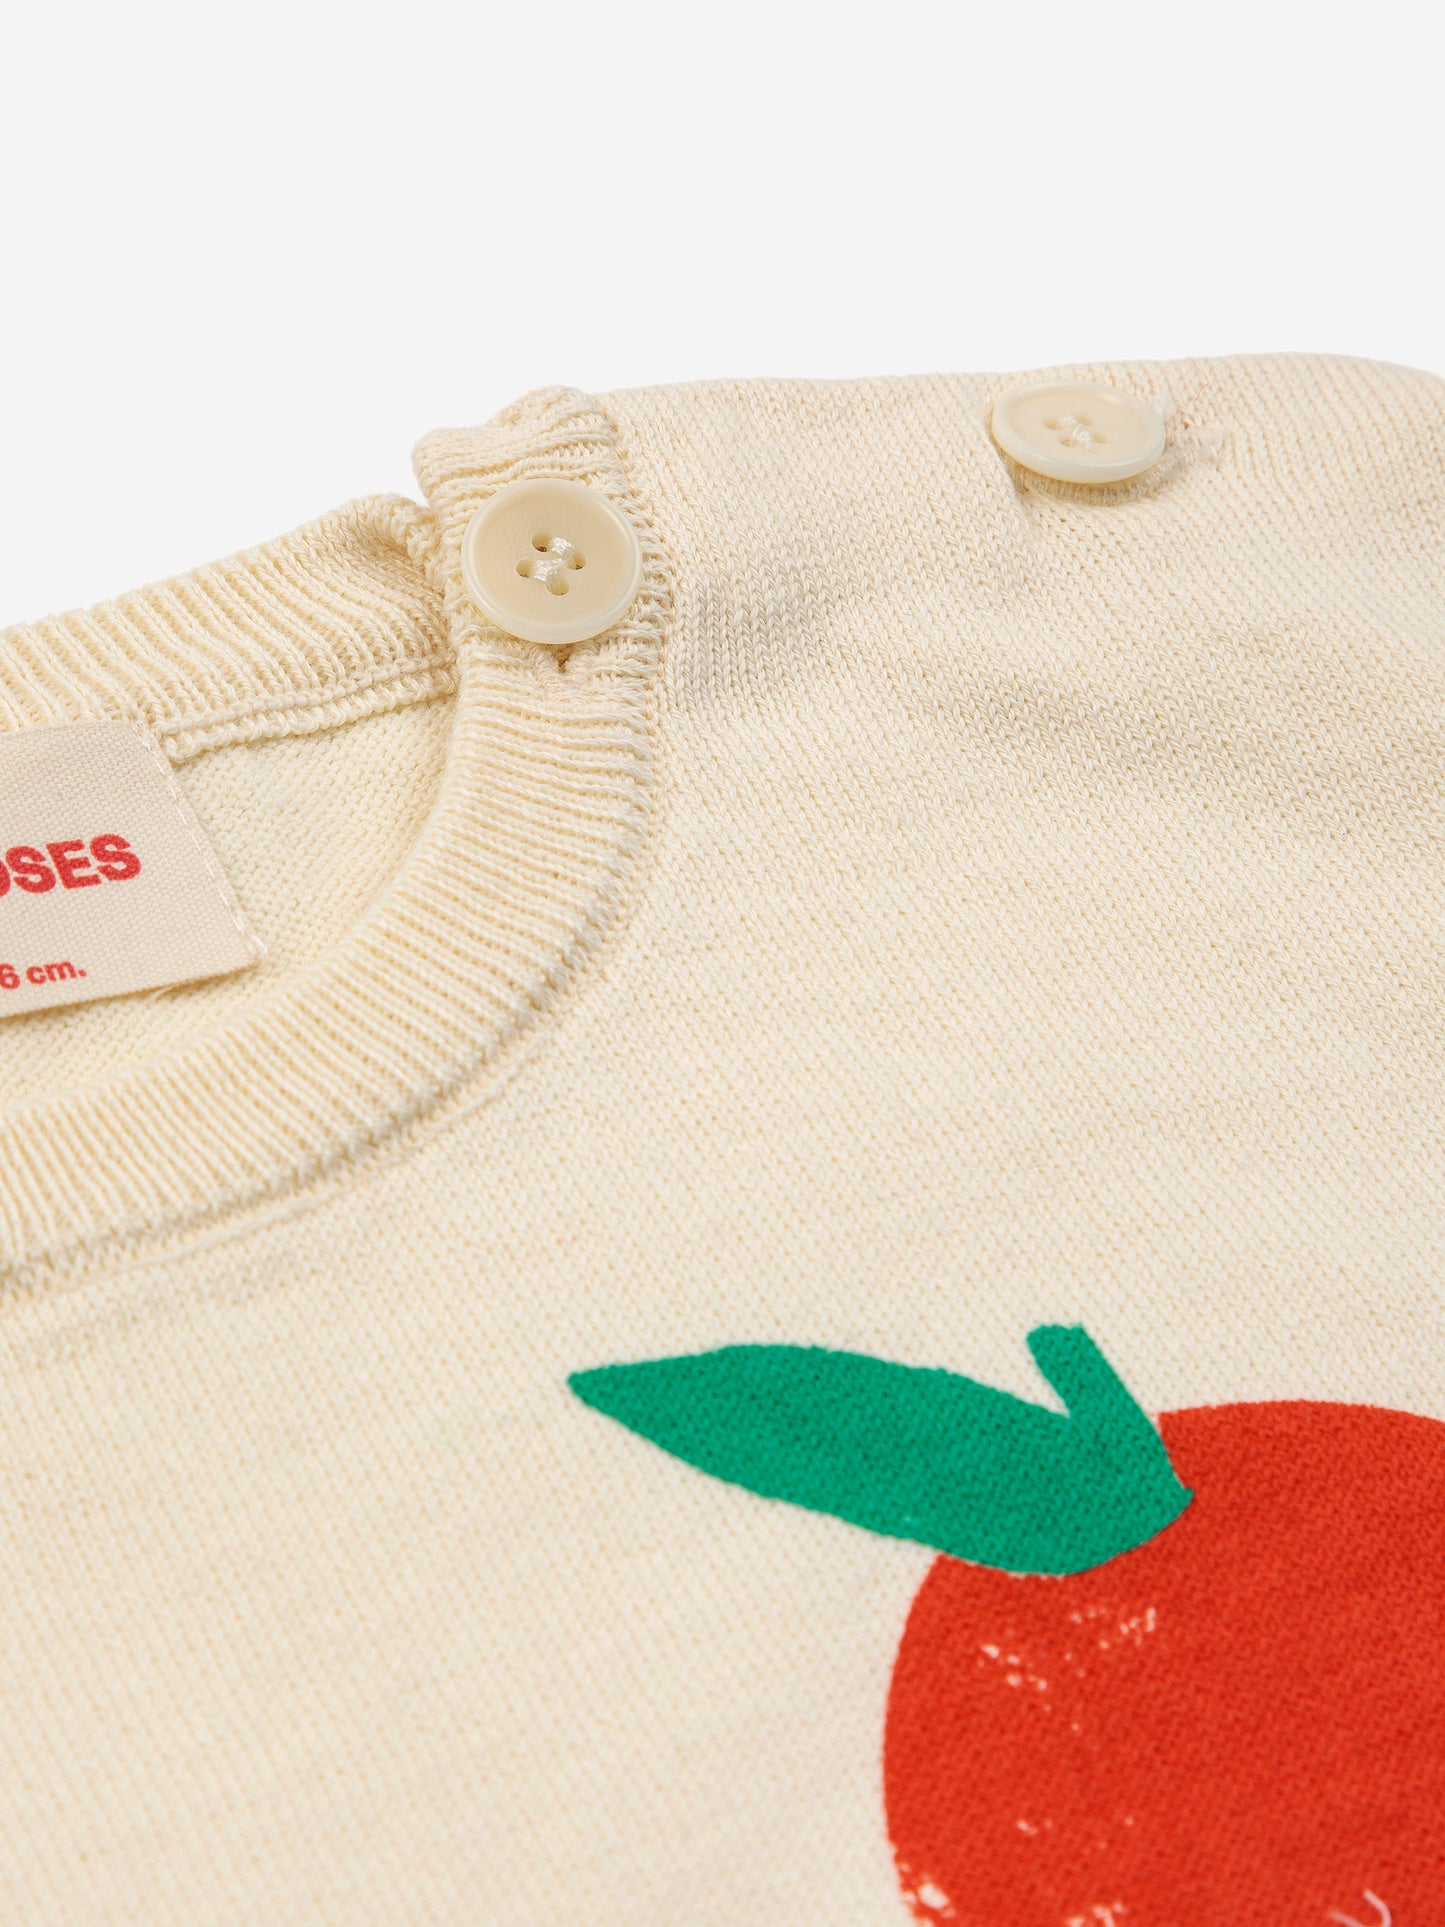 Bobo Choses Baby Tomato Knitted T-Shirt Off White